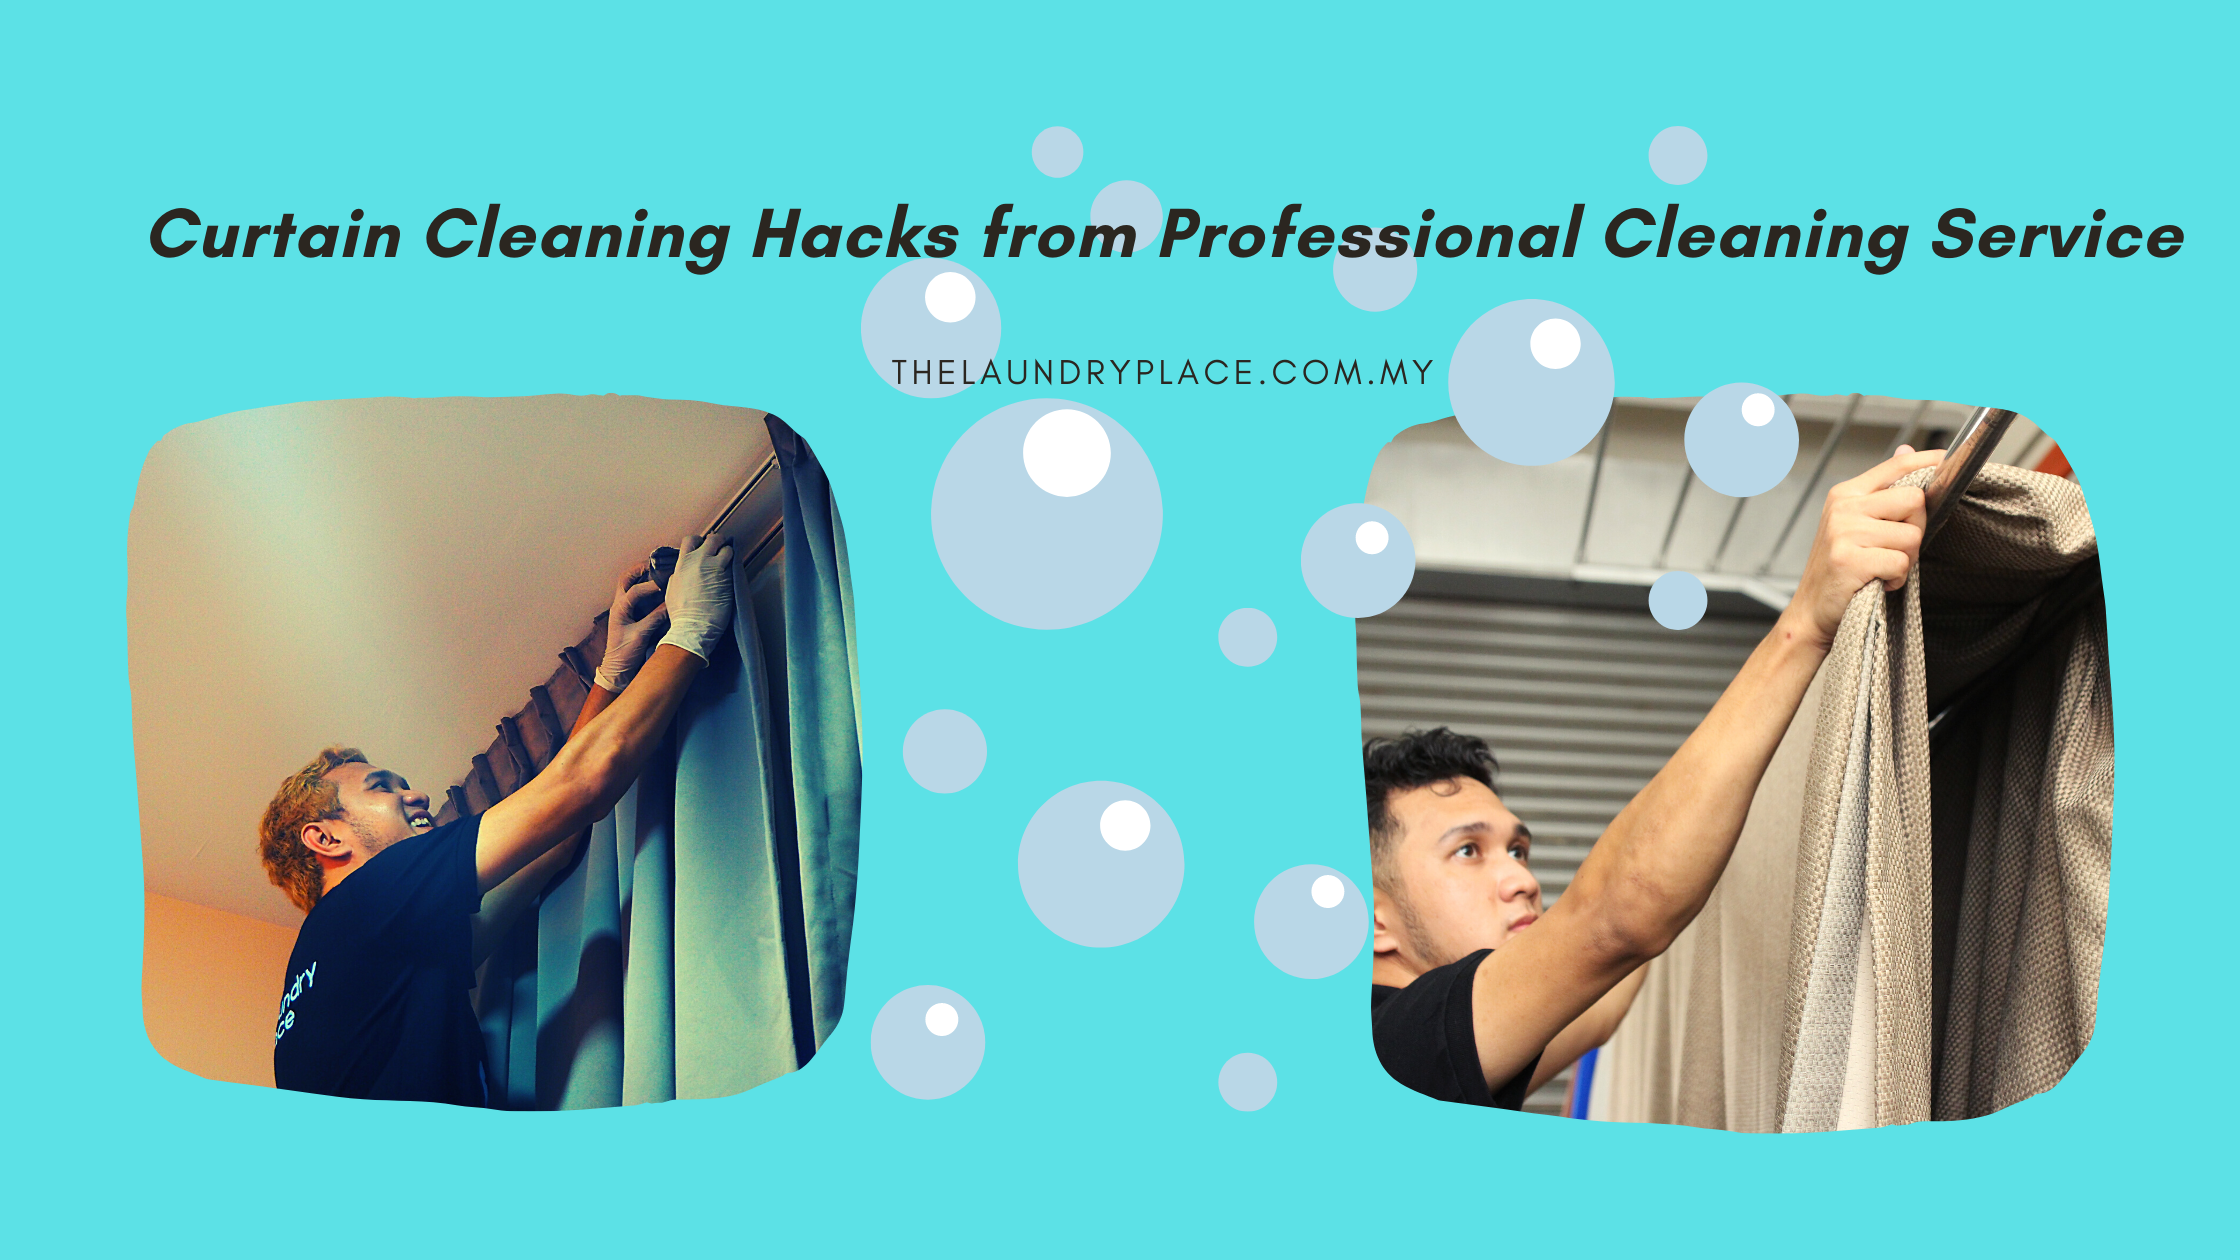 Curtain Cleaning Hacks from Professional Cleaning Service